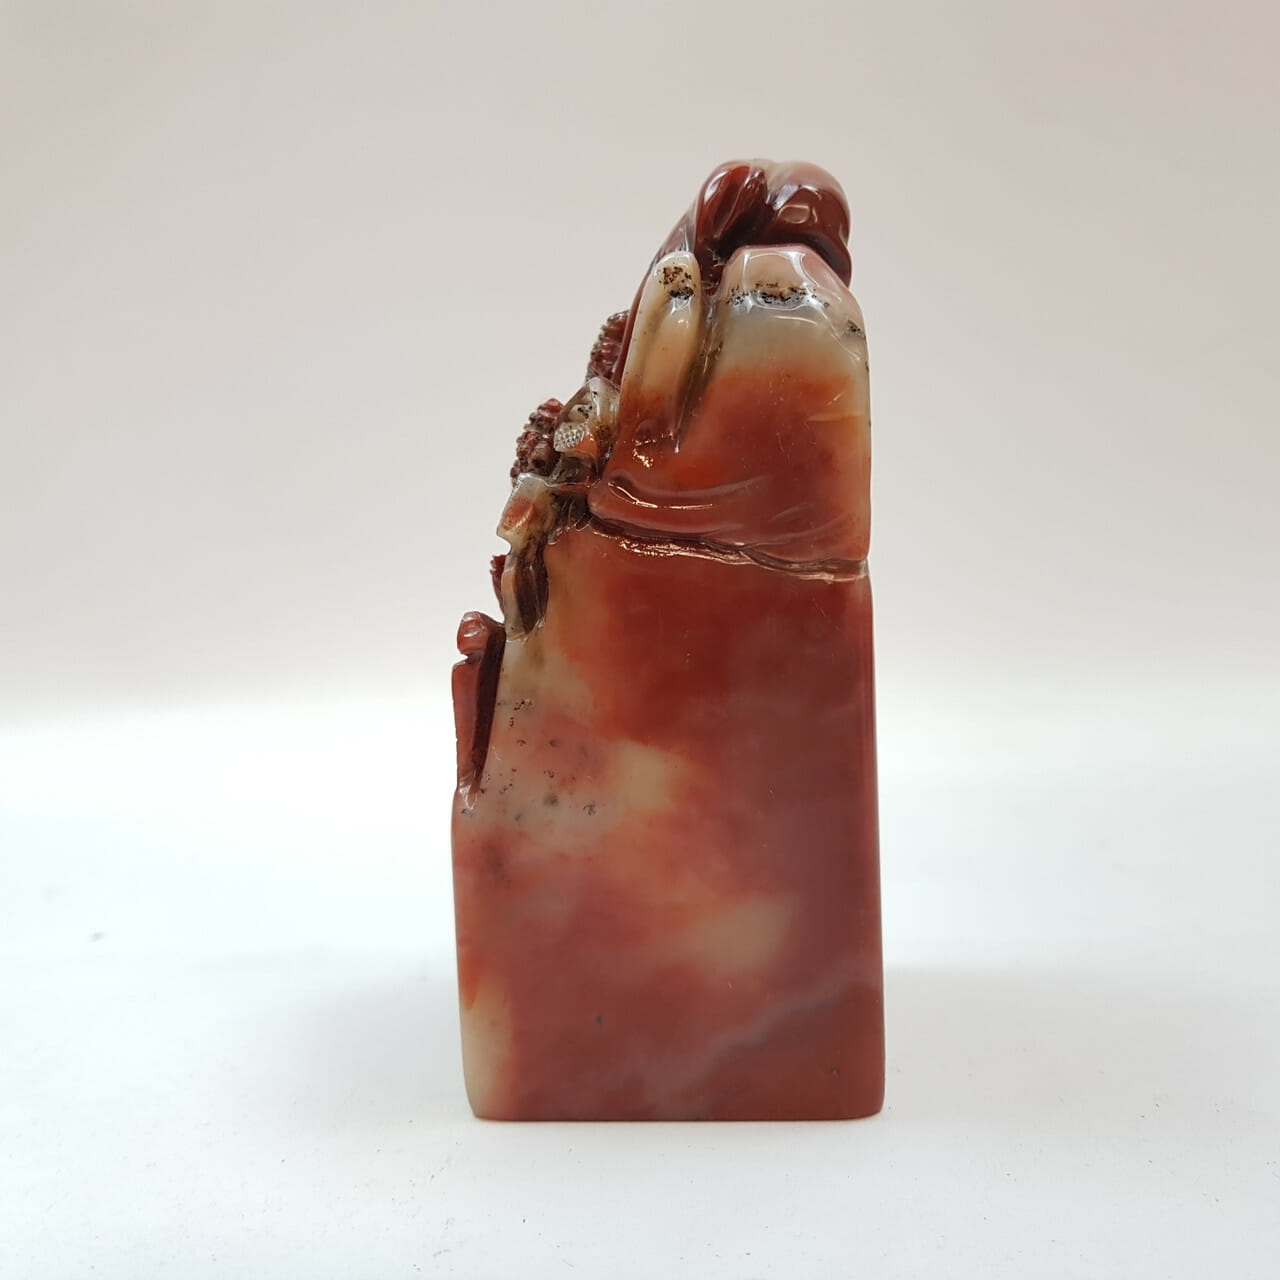 Chinese Carved Agate Seal / Stamp #47273